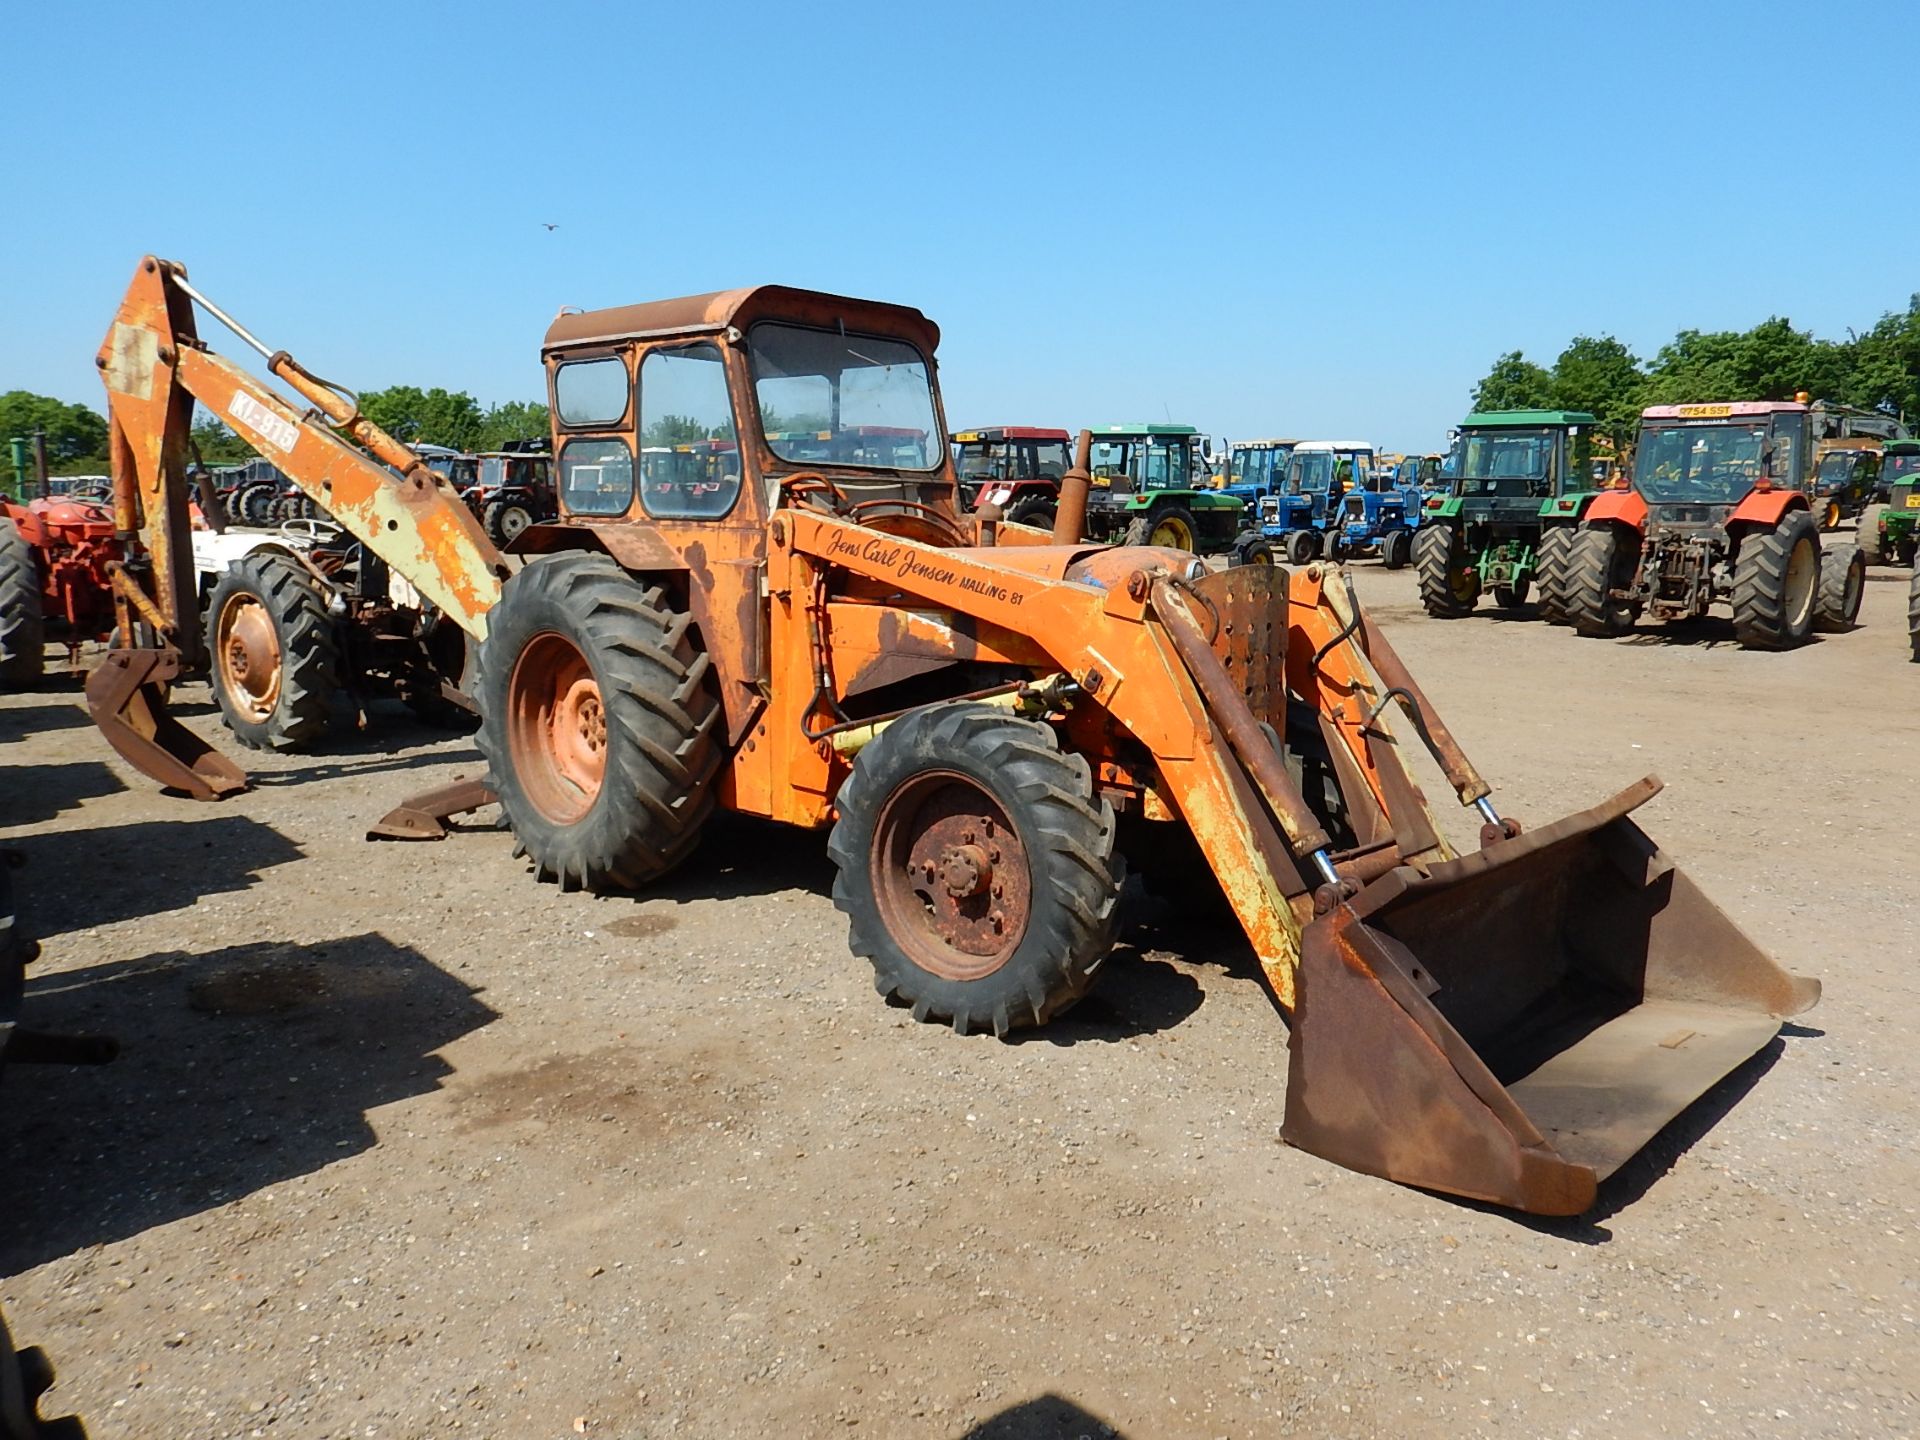 1963 ROADLESS Super Major 4cylinder diesel TRACTOR Serial No: 1967 Fitted with an Interconsult front